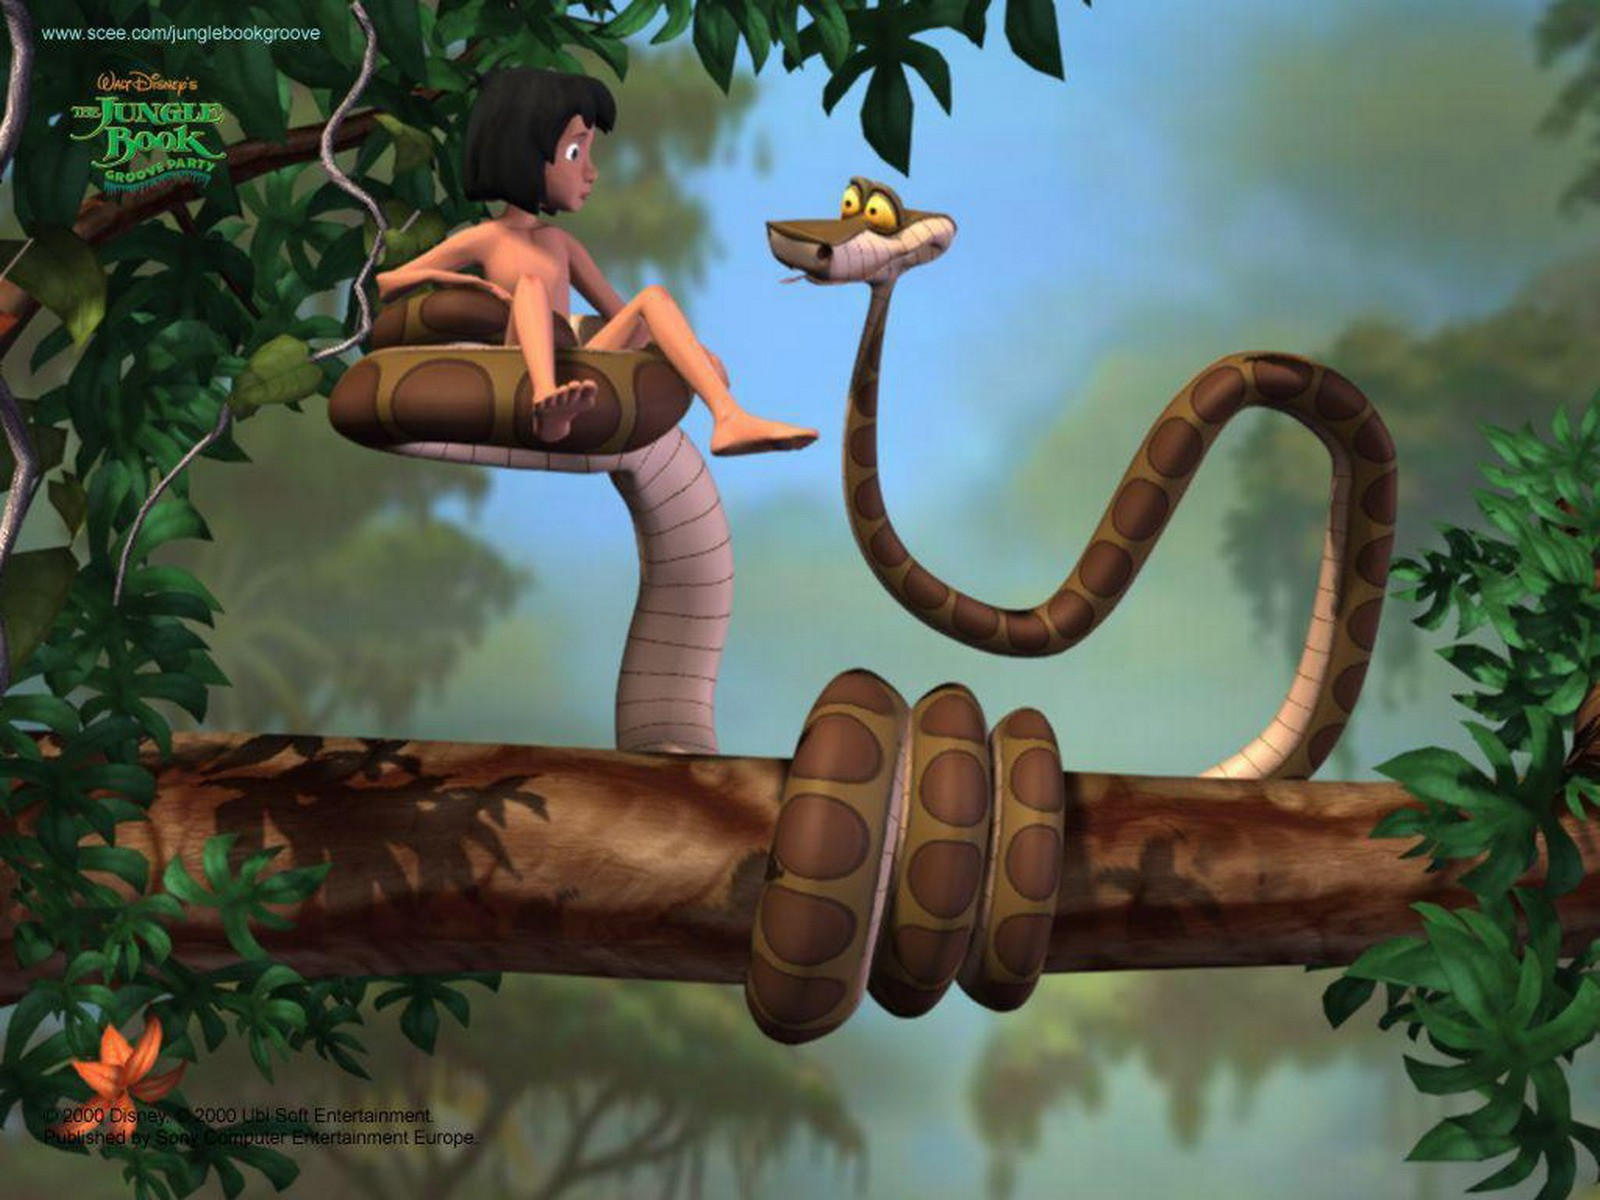 Best Jungle Book Malayalam Song Free Download